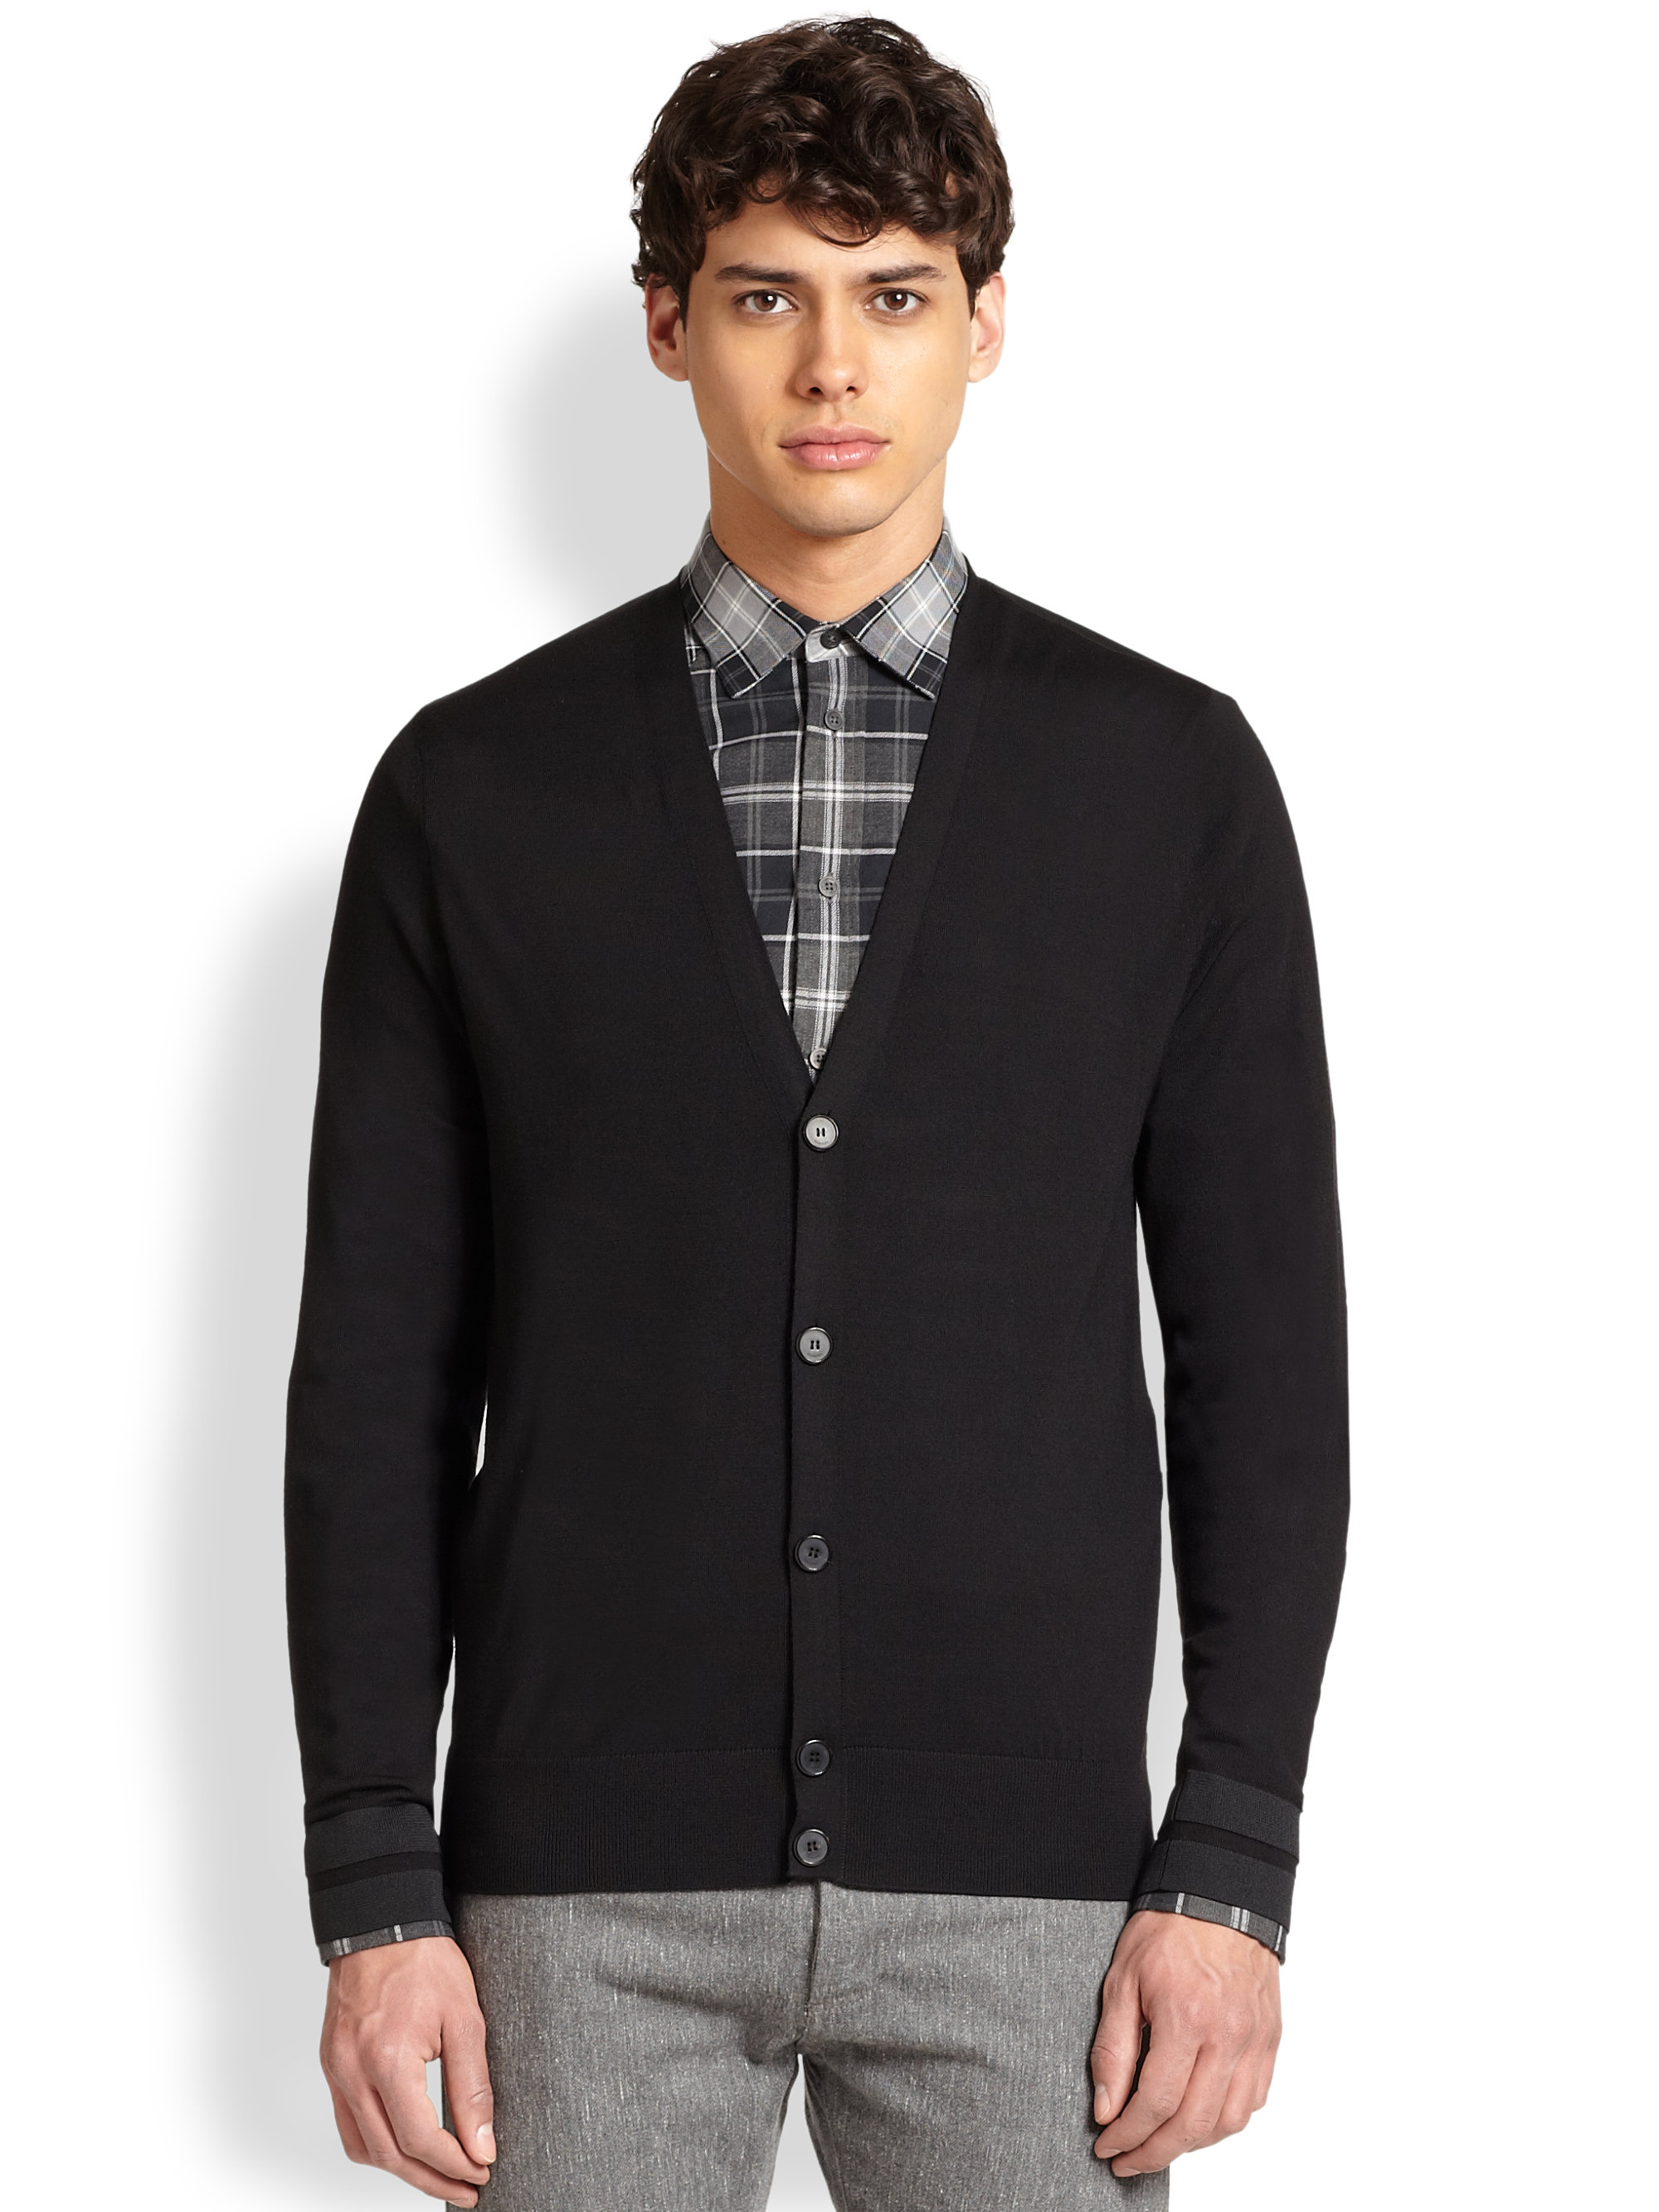 Givenchy Merino Wool Cardigan in Black for Men | Lyst